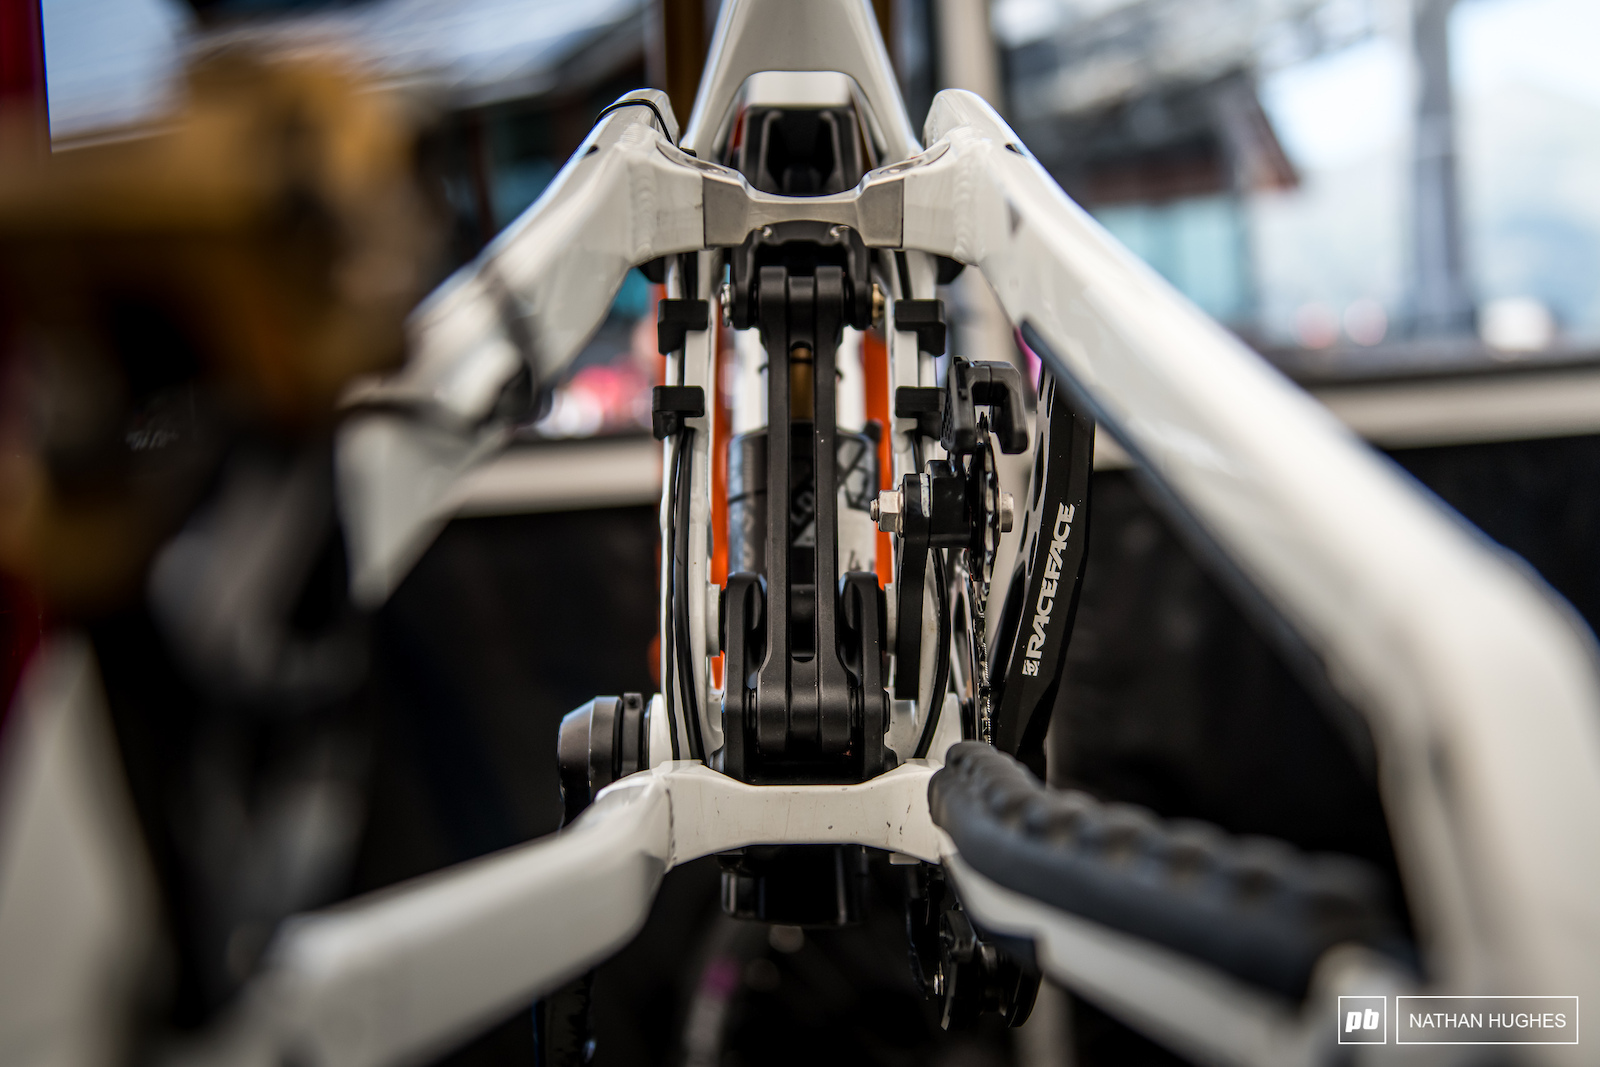 The Commencal minus rear wheel and mudguard has an interesting looking split linkage.